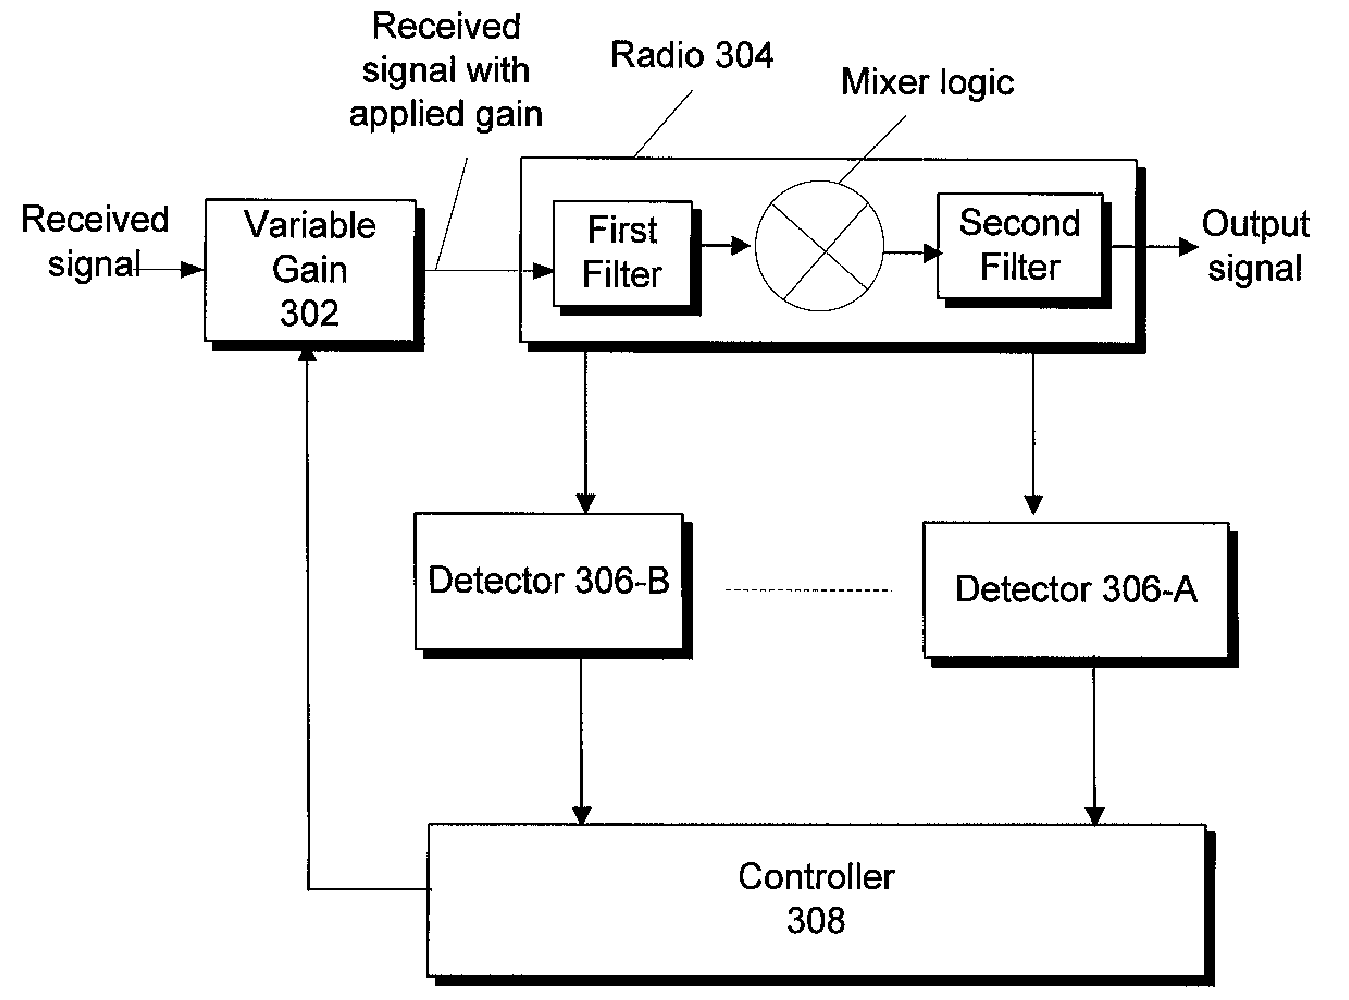 Techniques to deterministically reduce signal interference